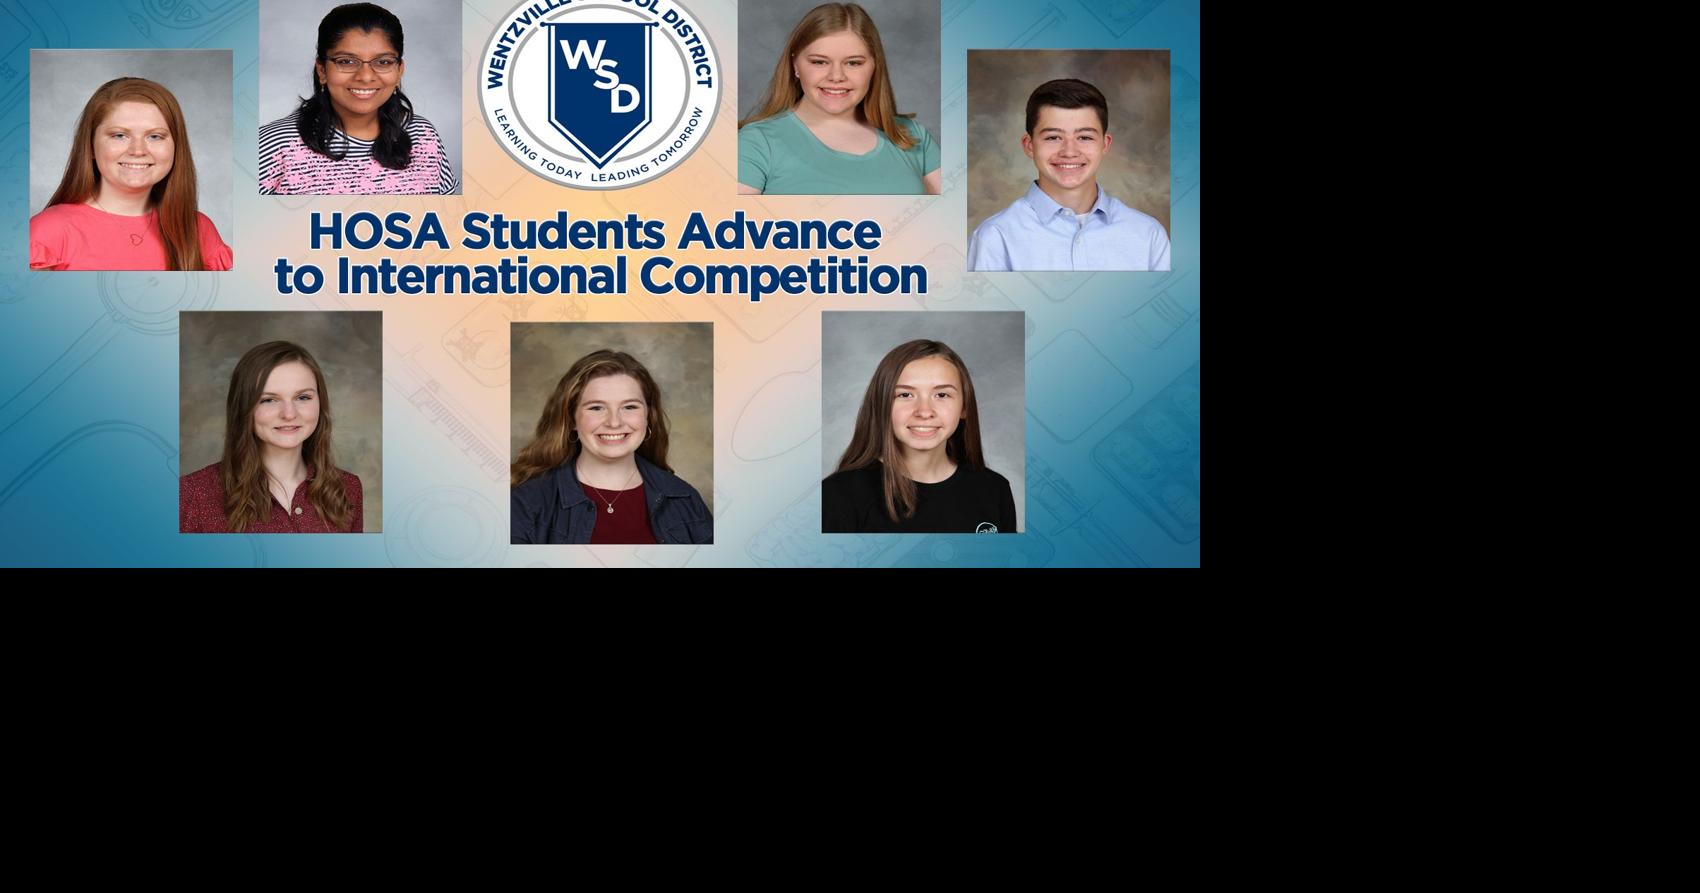 WSD HOSA Students Advance to International Competition